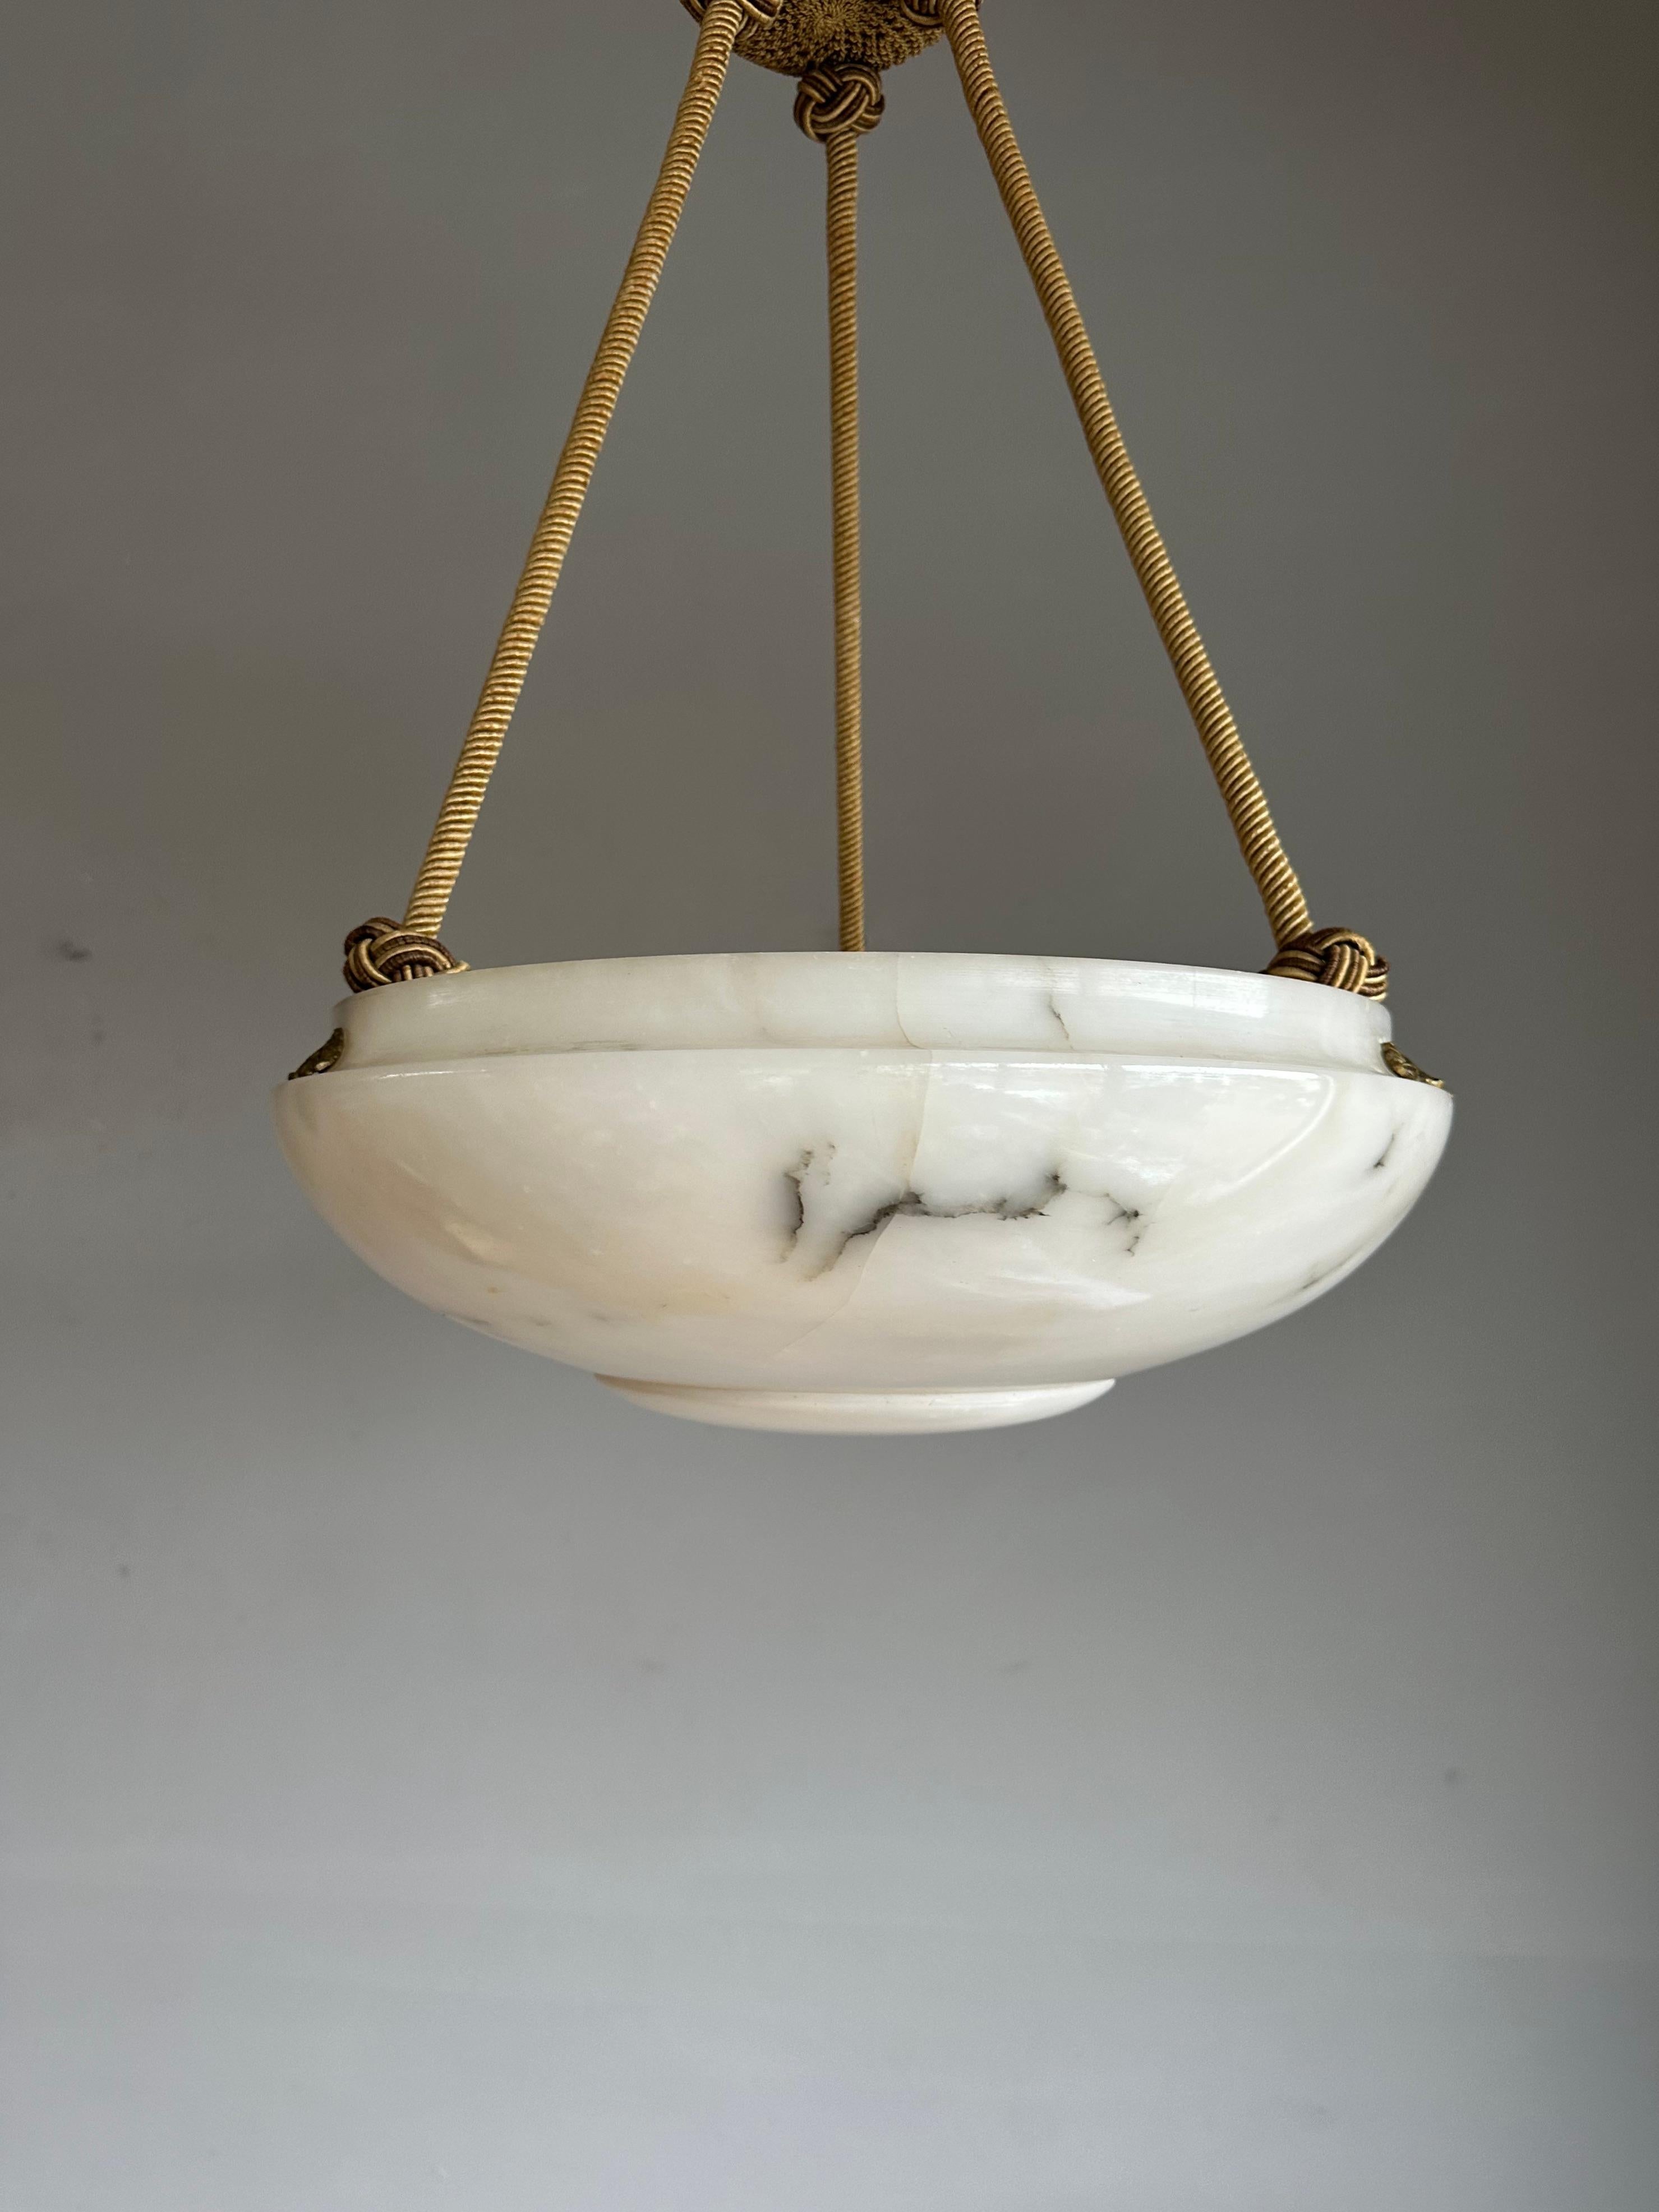 Good size and great design, hand carved, antique alabaster chandelier.

Thanks to its layered yet calm Art Deco design this timeless alabaster chandelier will look great in all kinds of interiors. Apart from one minor imperfection one could not wish